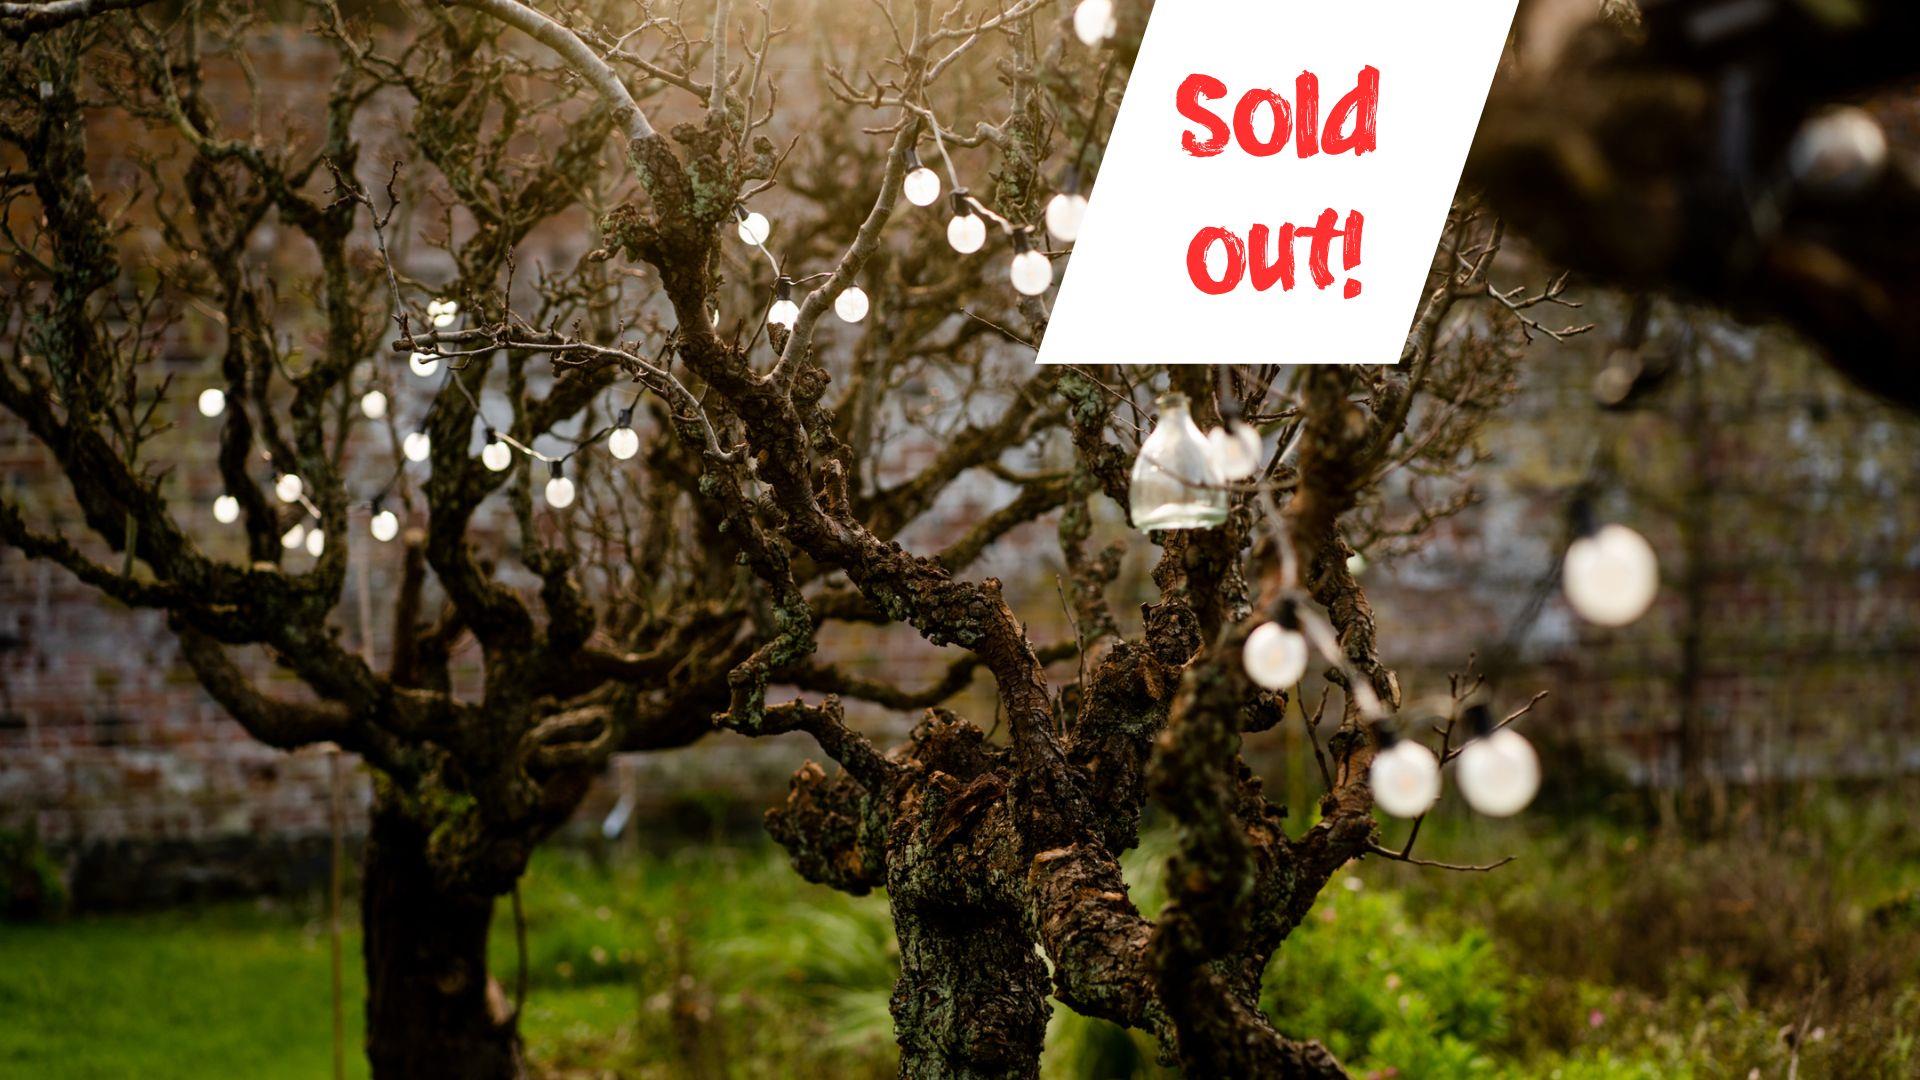 A string of lightbulbs trailed through the branches of trees in the walled garden with the text sold out